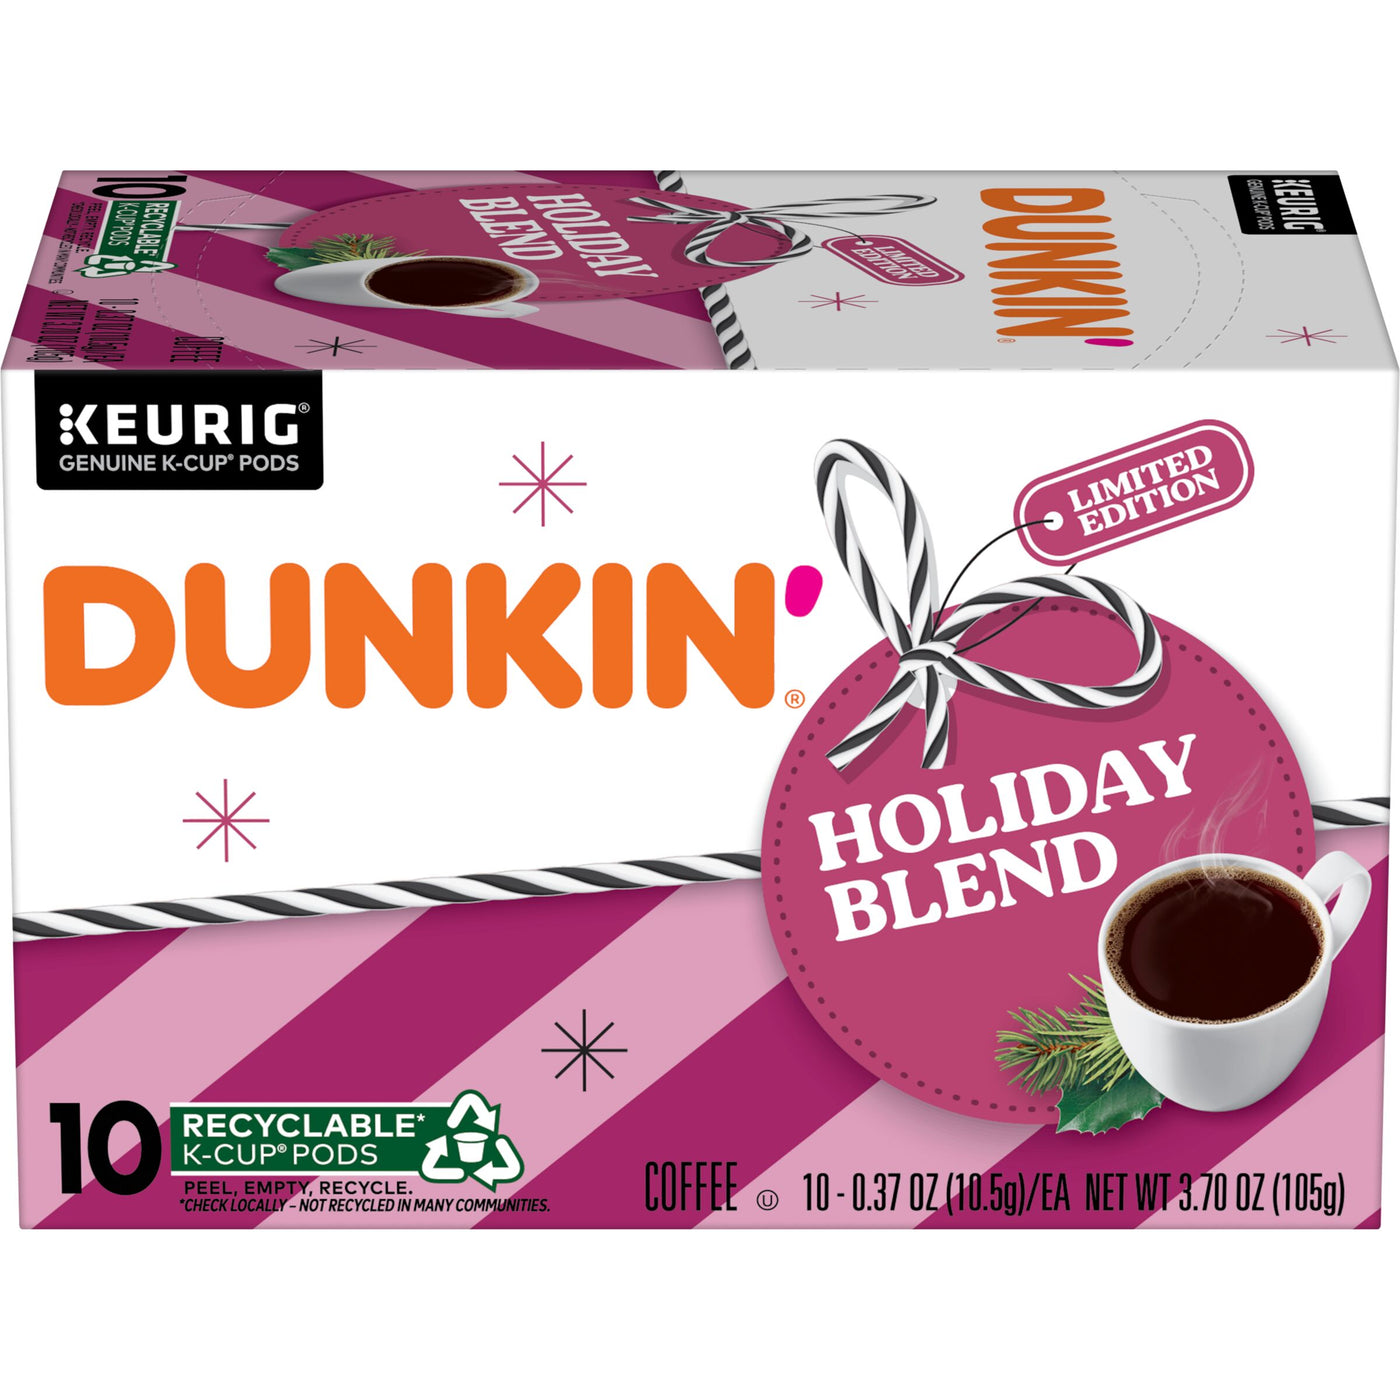 Dunkin' Holiday Blend Flavored Coffee, K-Cup Pods